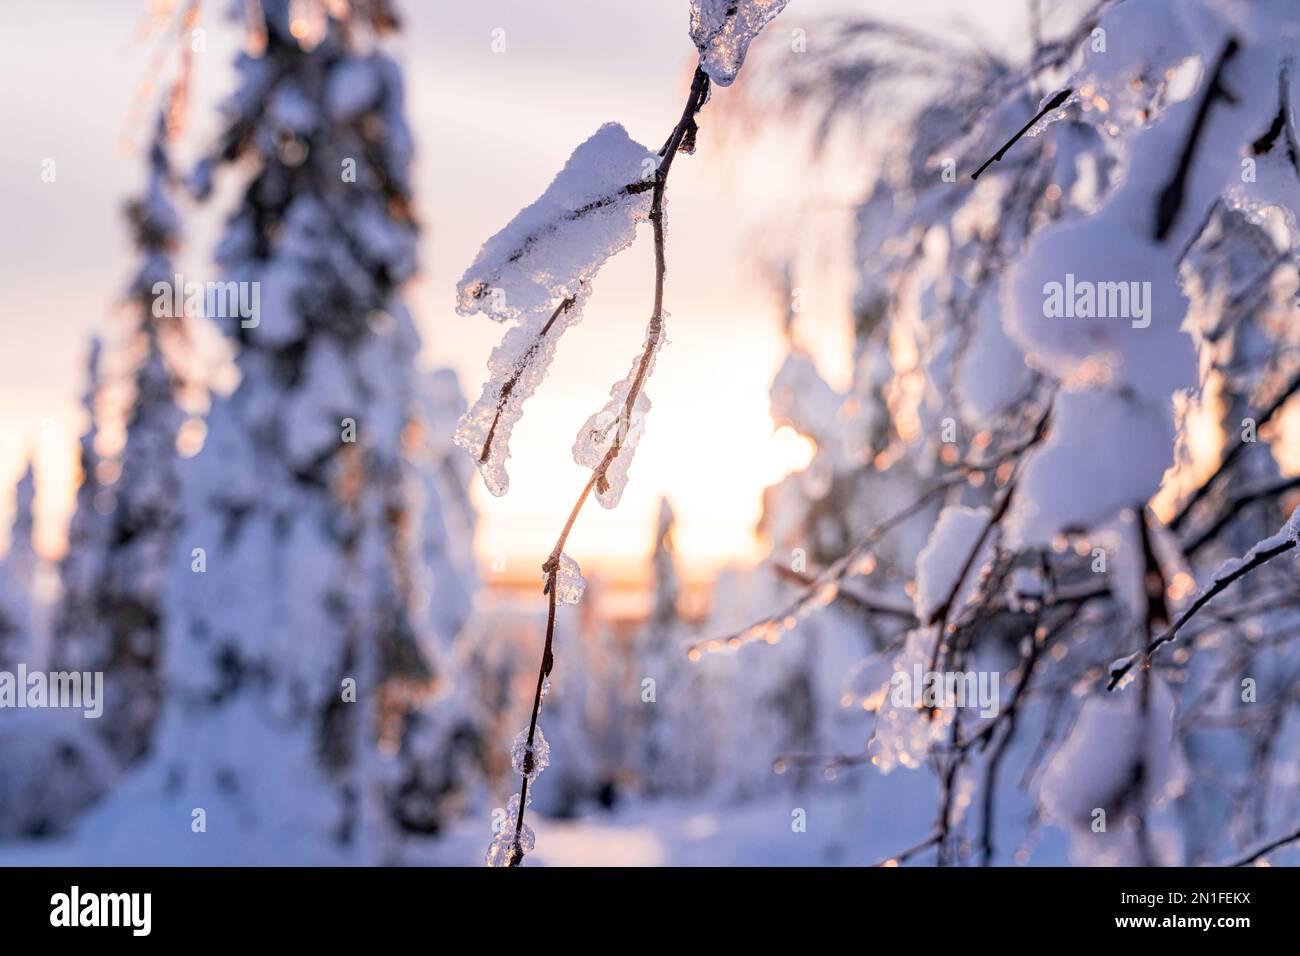 Close-up details of tree branches covered with snow at sunrise, Lapland, Finland, Europe Stock Photo